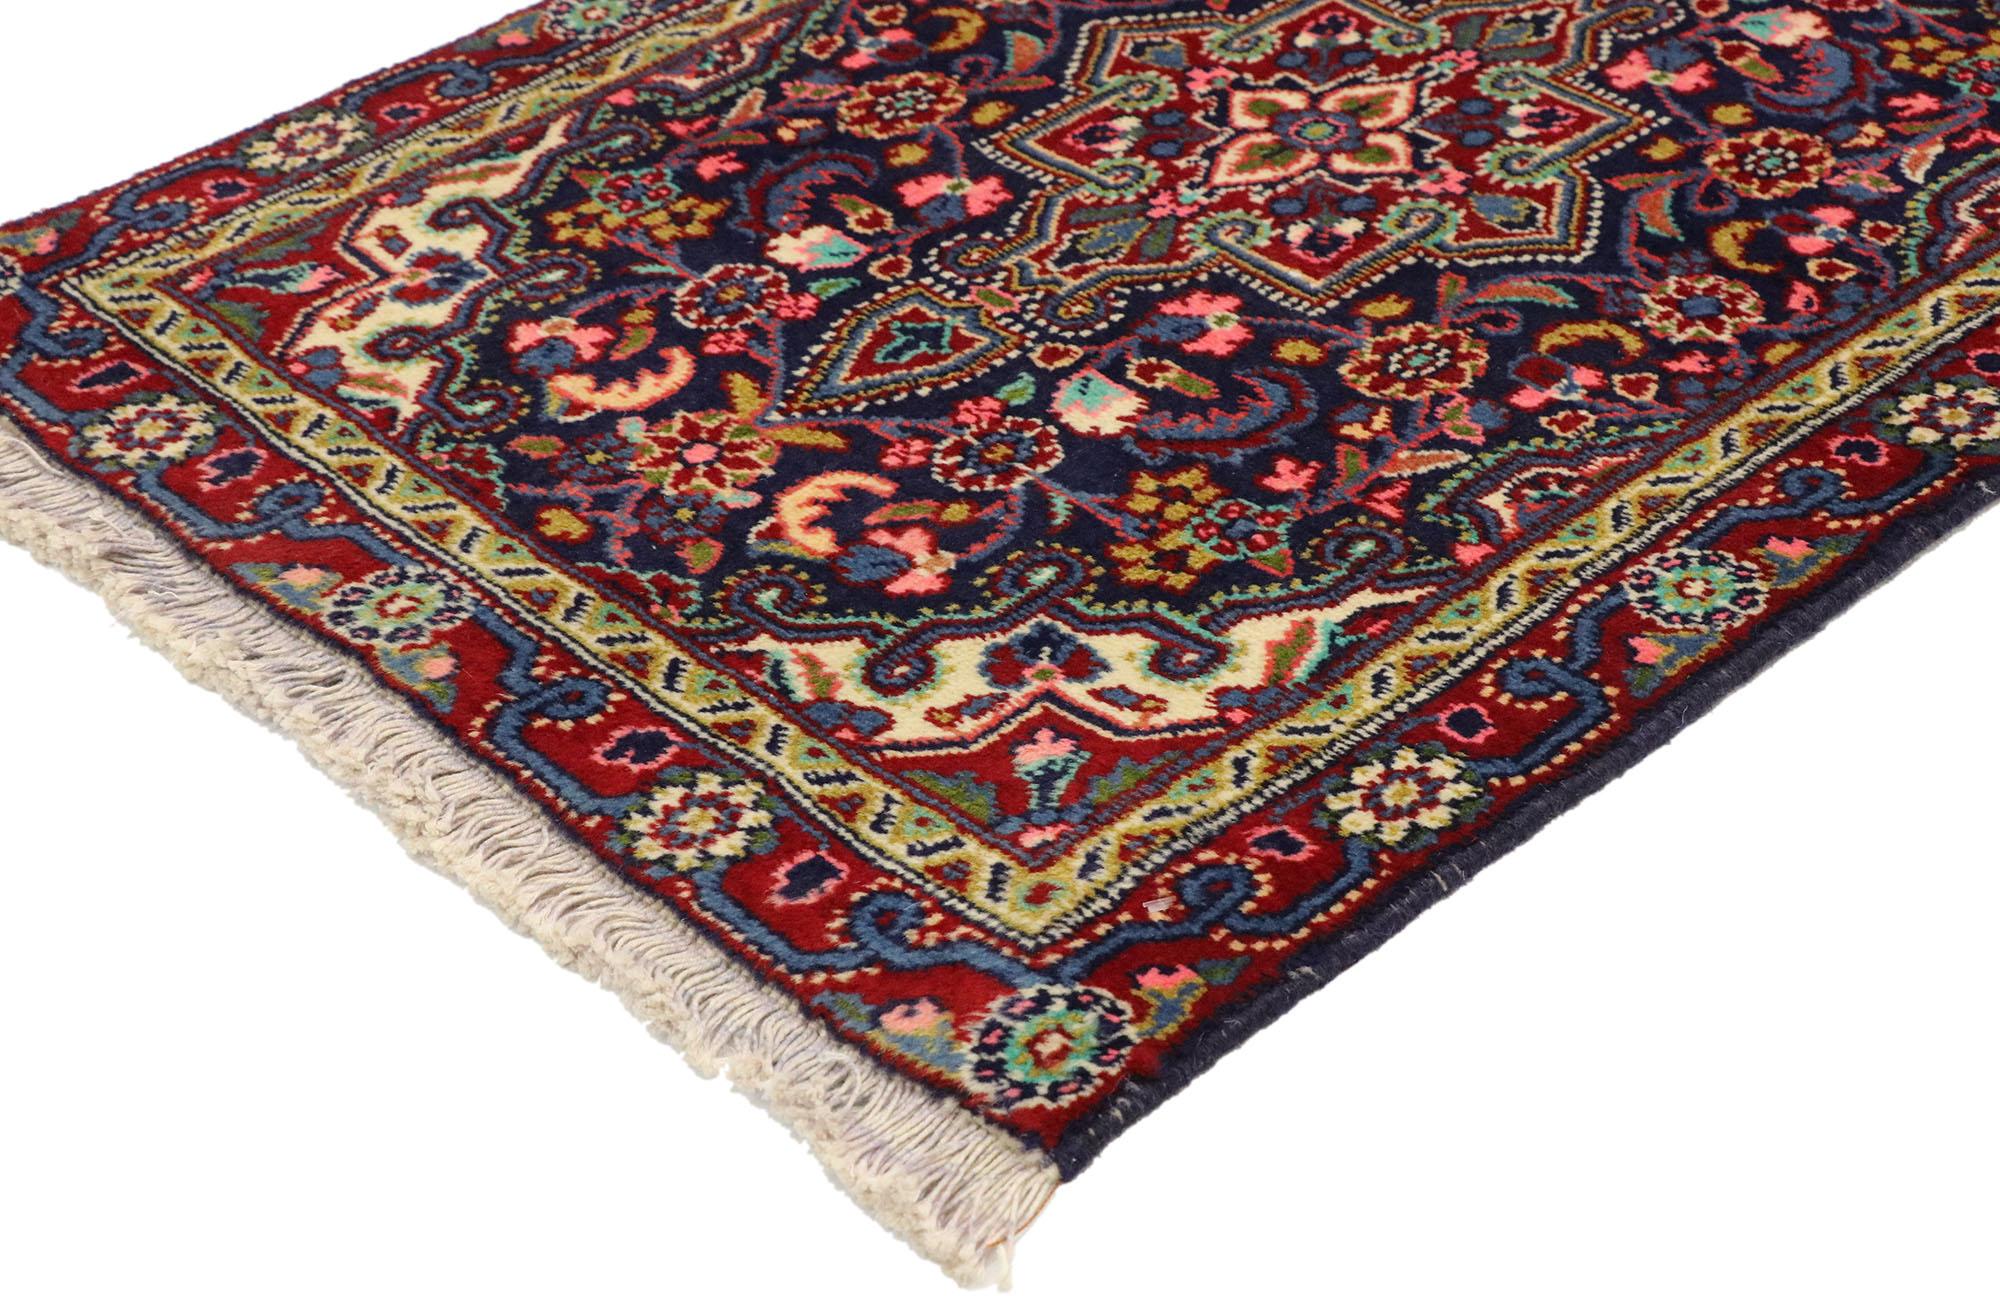 76219, vintage Persian Hamadan Accent rug, small Persian rug. This vibrant Persian Hamadan rug with modern style features a stylized central medallion rendered in hues of hot pink, mint green, royal blue, apricot, ivory and aquamarine floating on a